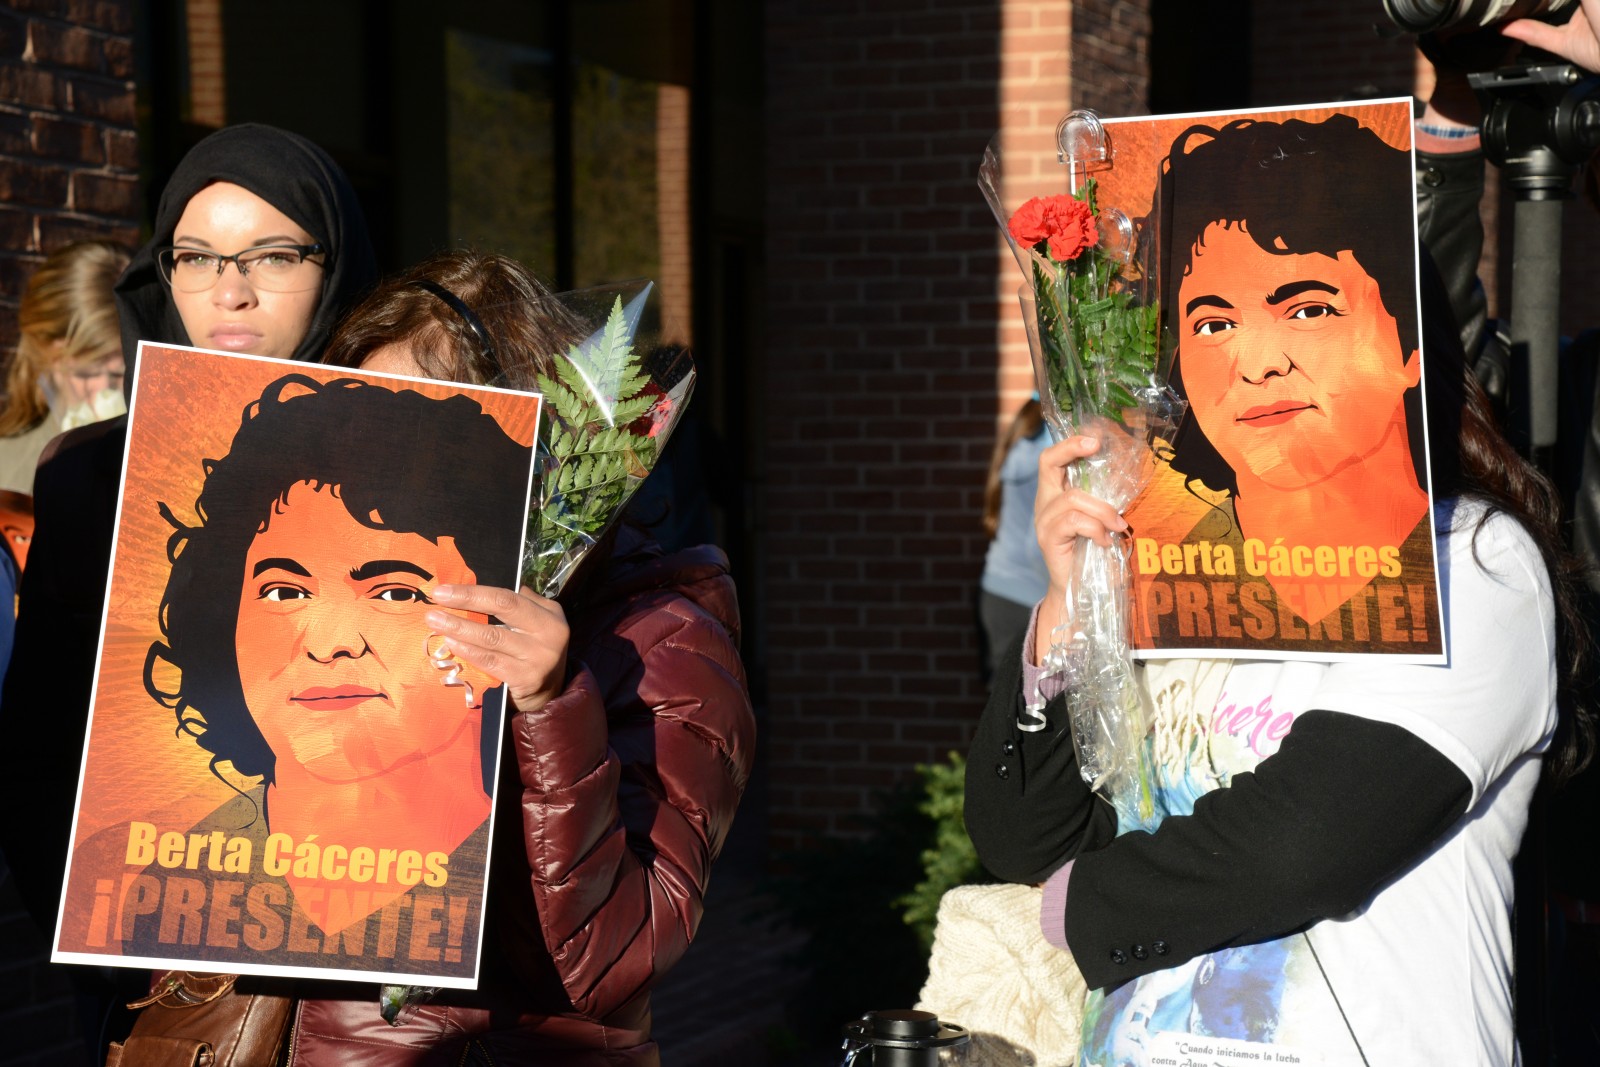 Mourners hold a vigil outside the Organization of American States for Berta Cáceres, who was murdered in Honduras on March 3. Cáceres was a leading environmental activist who had opposed the Agua Zarca dam. Photo courtesy Daniel Cima / Comisión Interamericana de Derechos Humanos via Flickr Creative Commons 